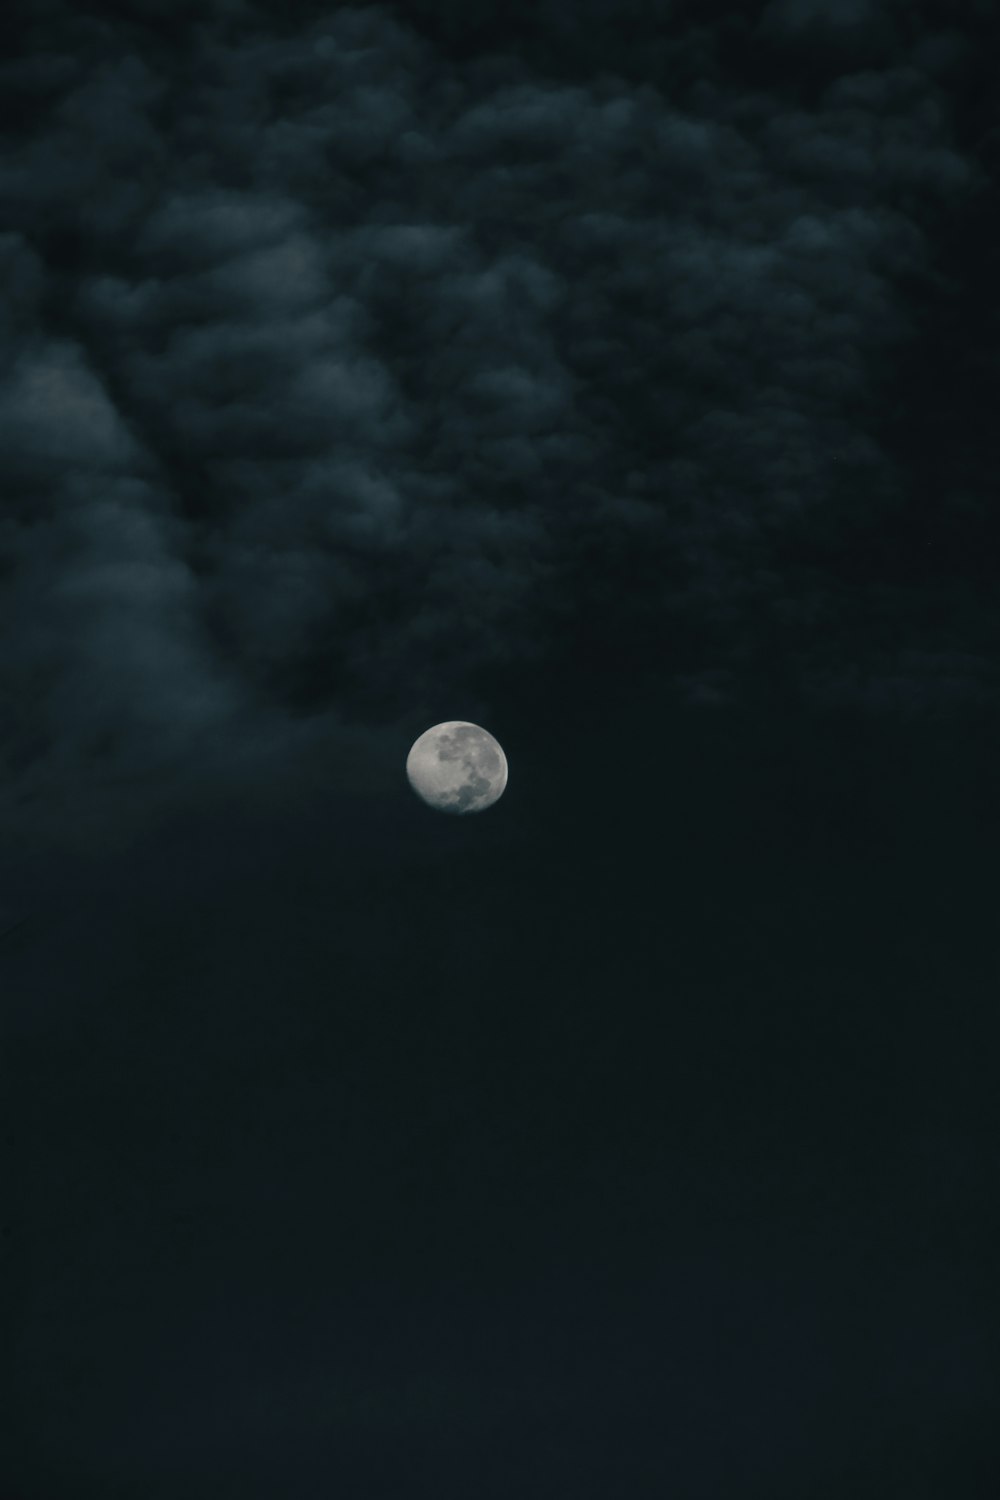 a full moon in a dark sky with clouds